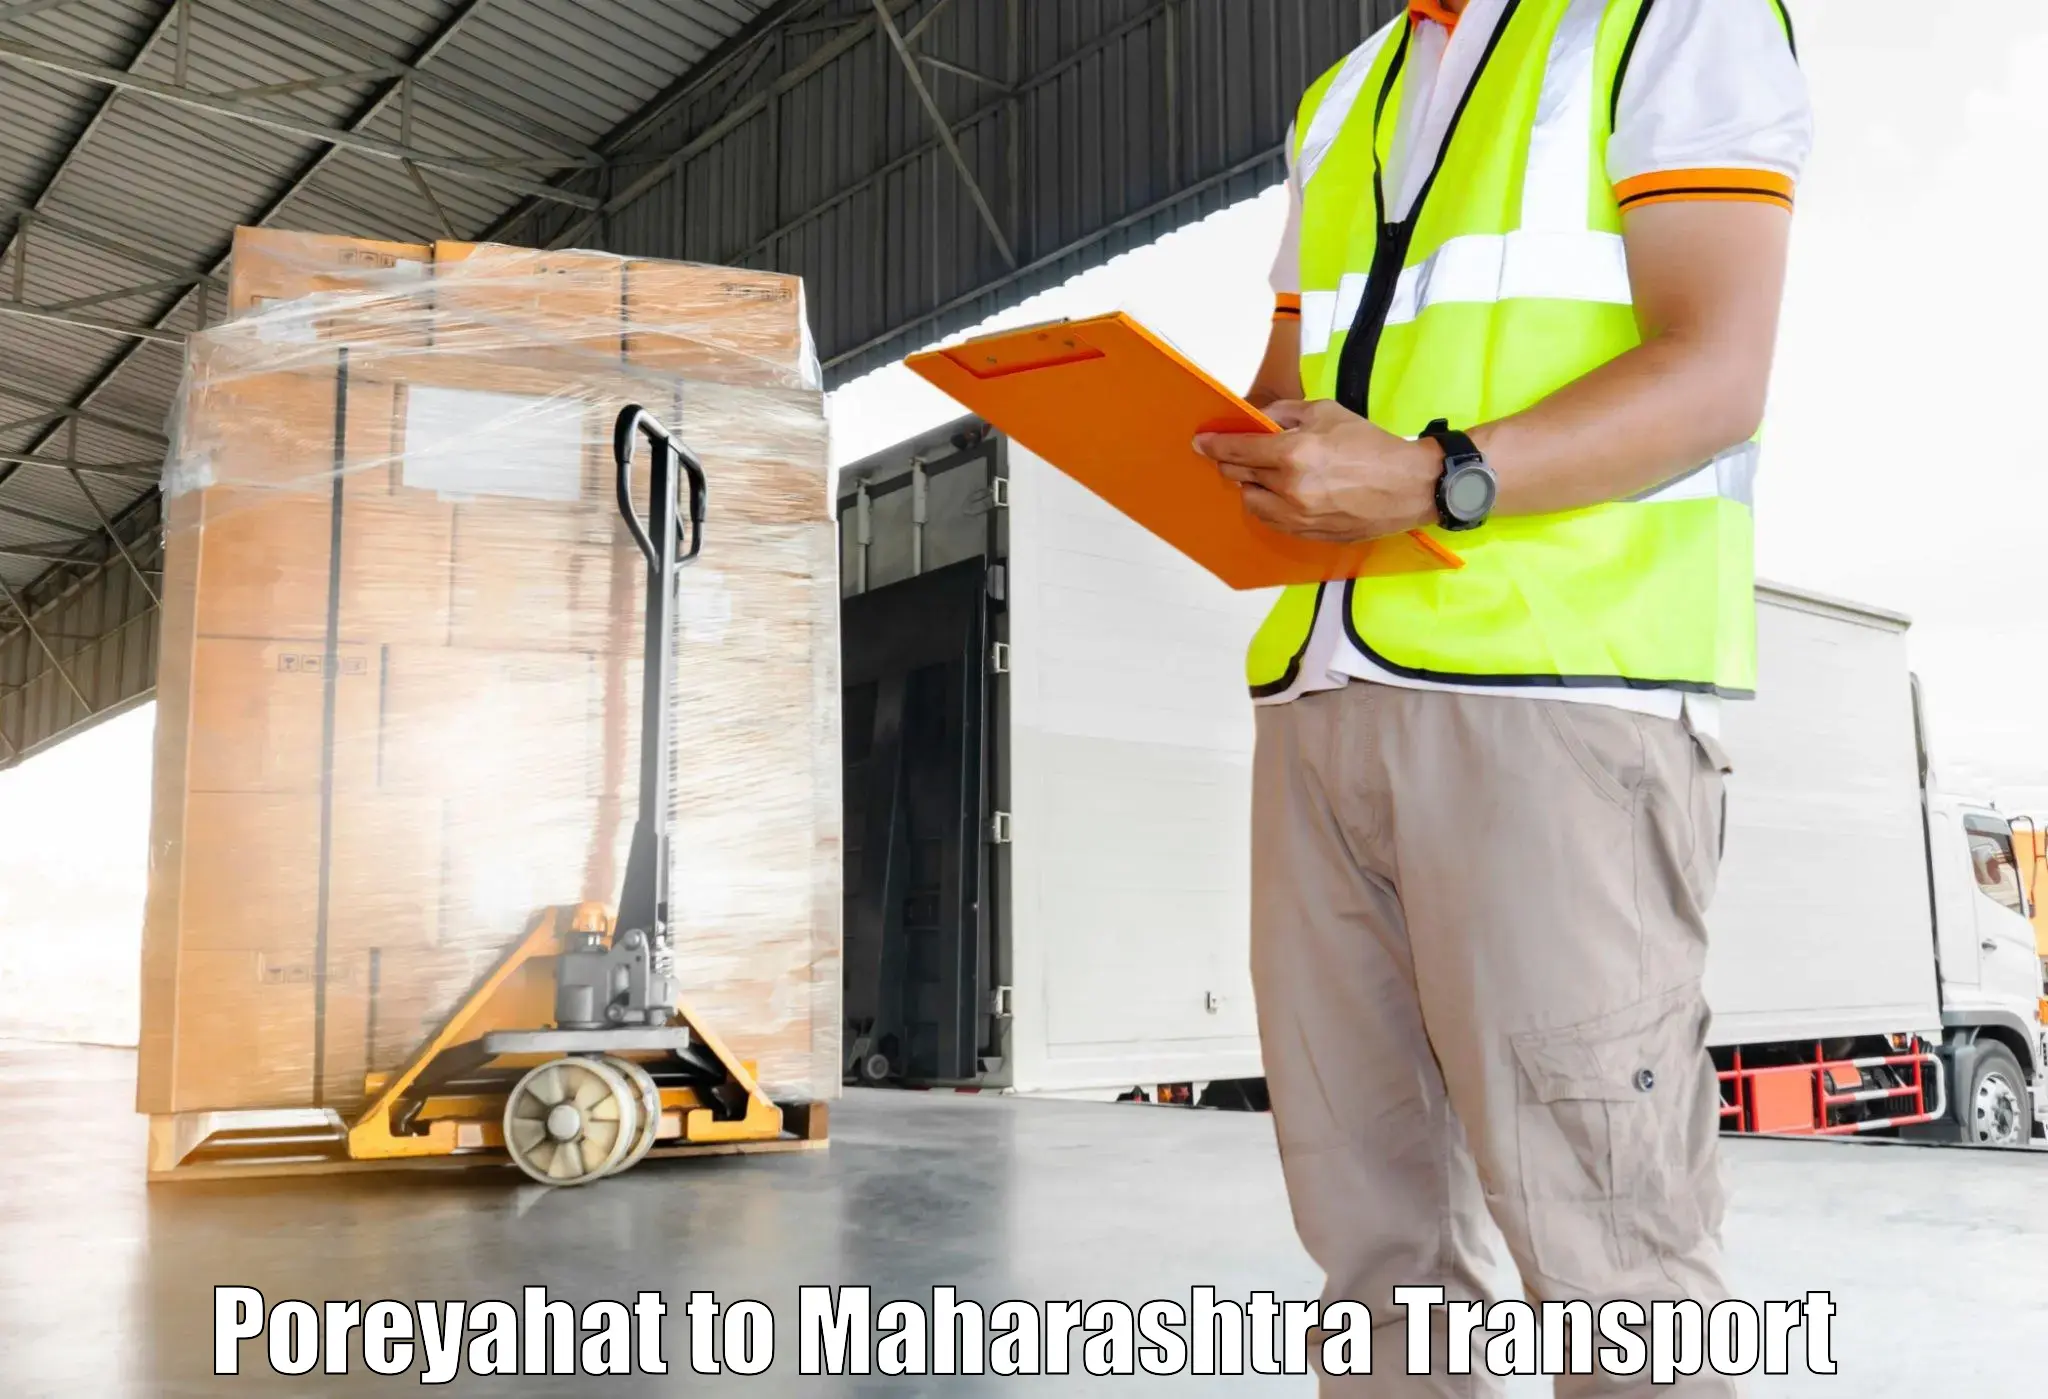 Truck transport companies in India in Poreyahat to Jamkhed